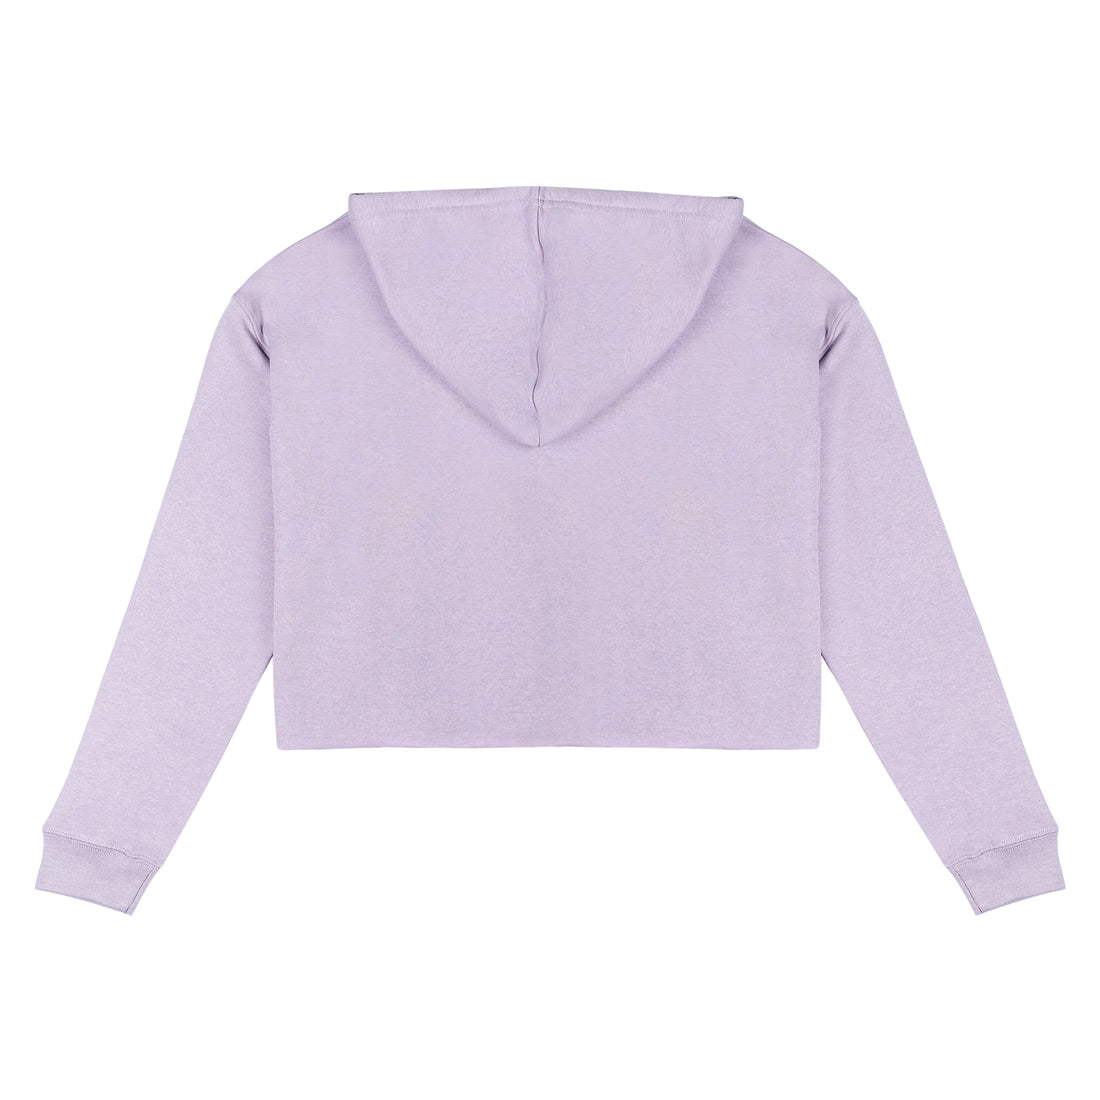 OnlyFans Cropped Hoodie - Lilac